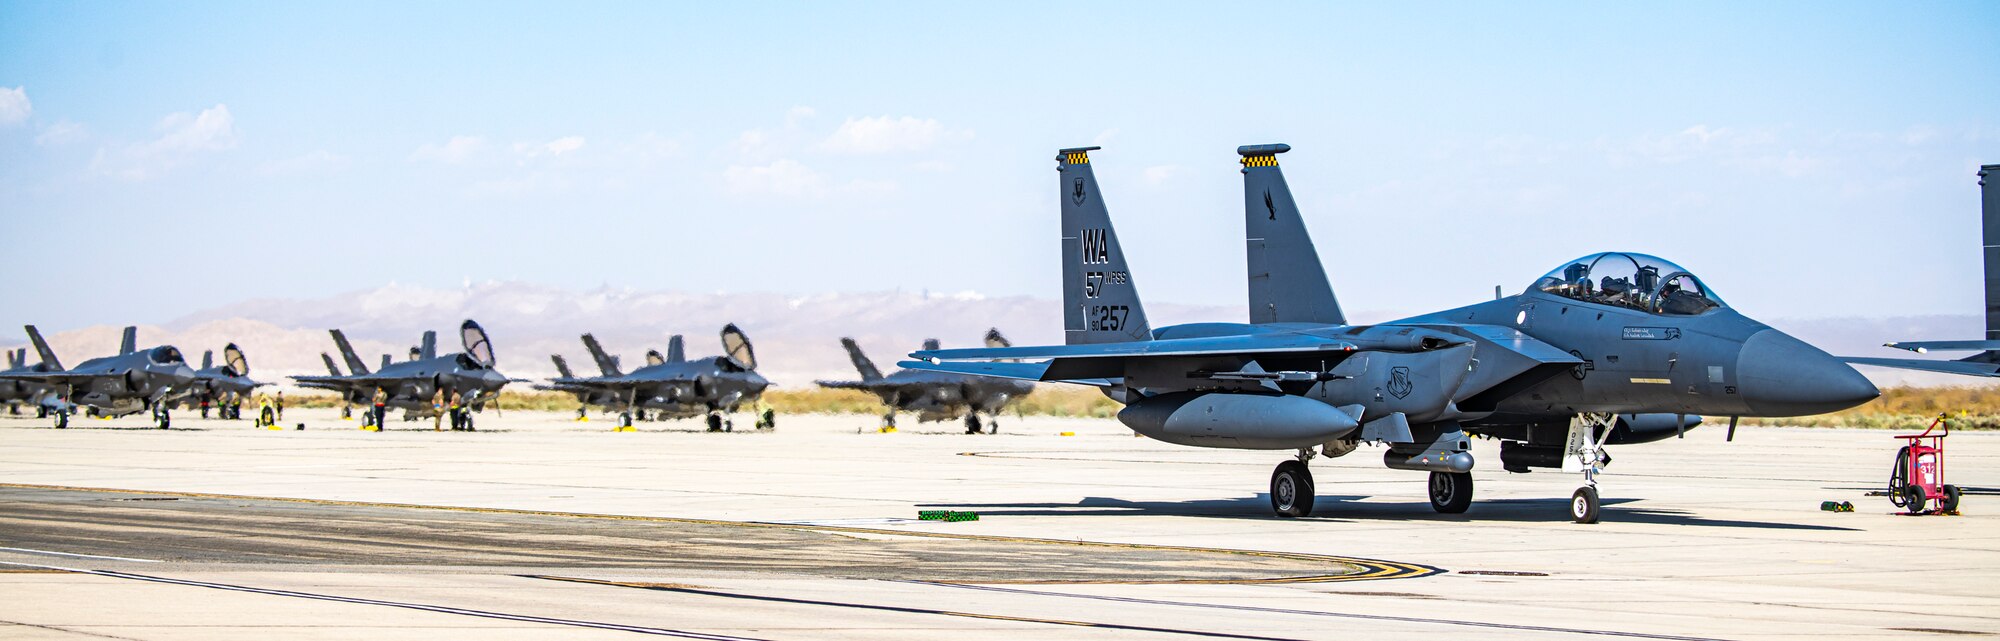 F-22s, F-35s, F-15s and F-16s assigned to the U.S. Air Force Weapons School park on the historic flightline at Edwards Air Force Base, California. The USAF Weapons School teaches graduate-level instructor courses that provide the world's most advanced training in weapons and tactics employment.